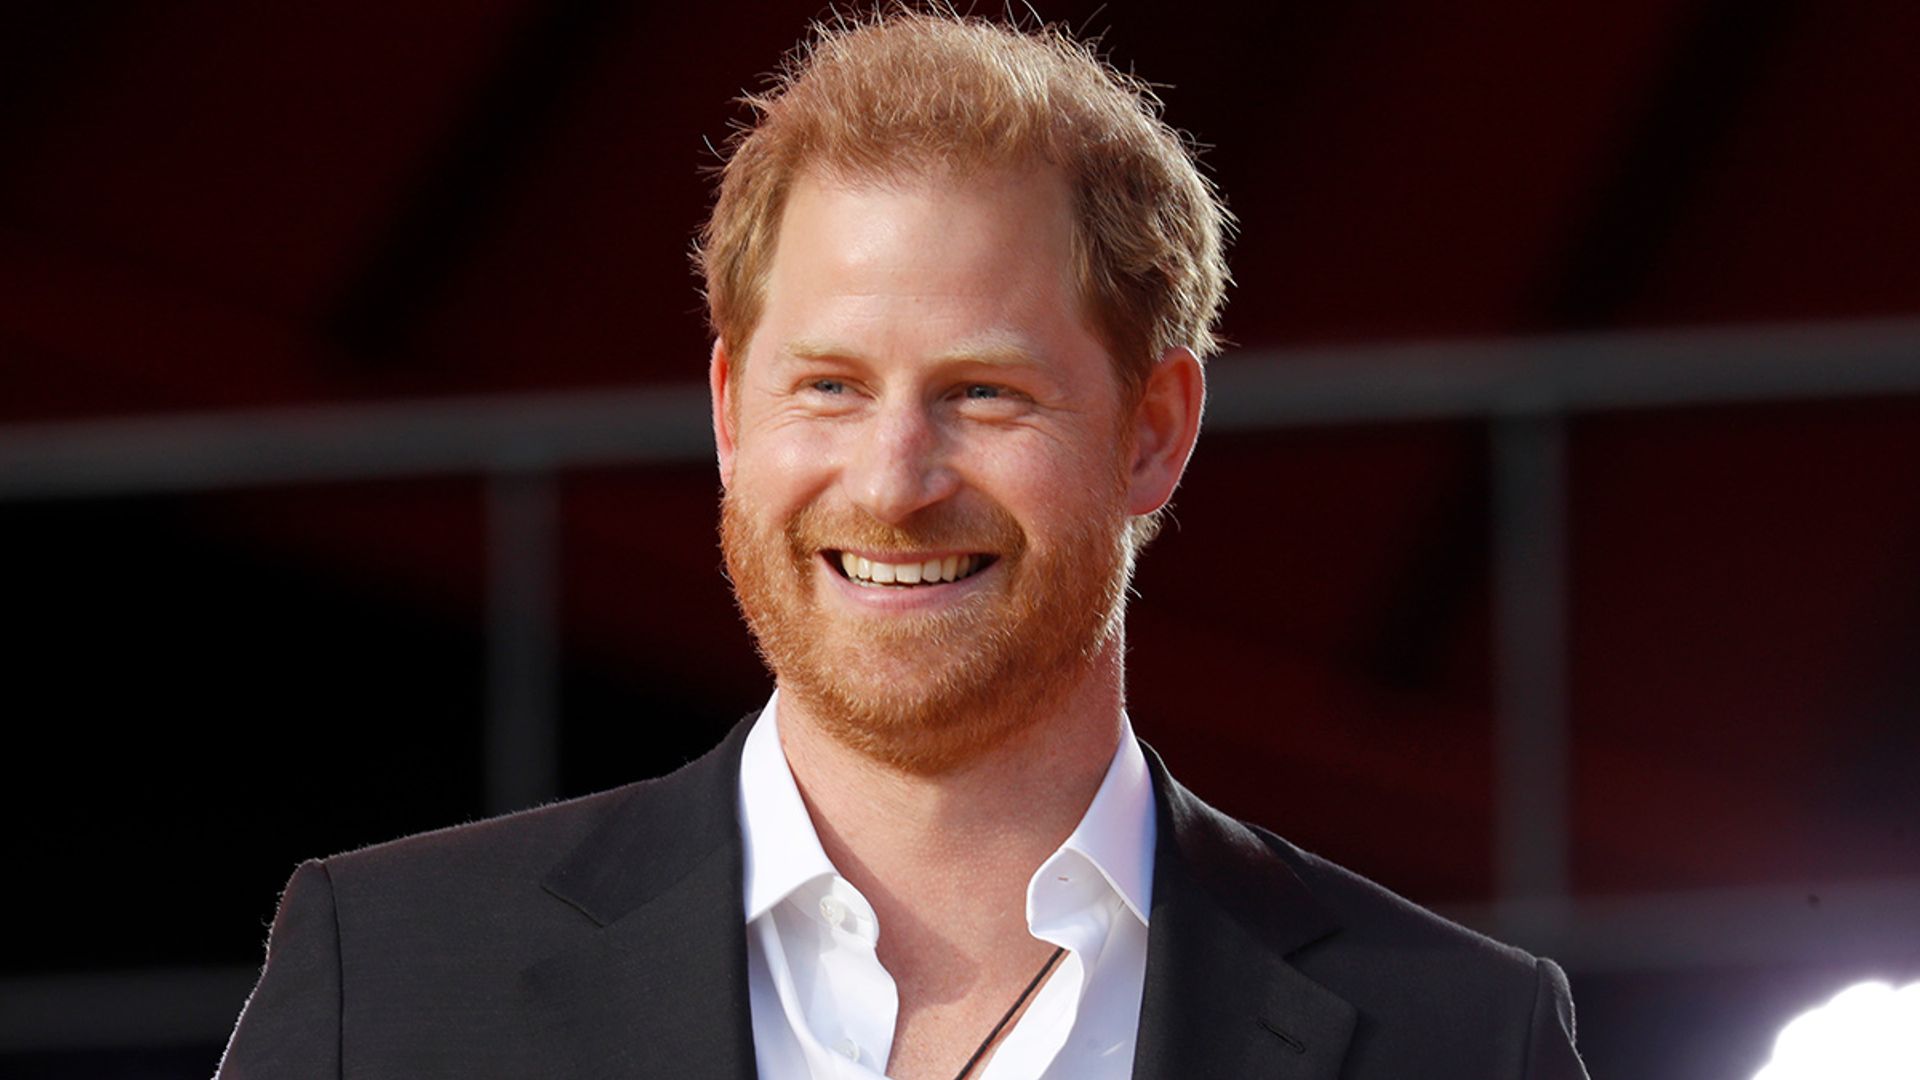 prince harry laughing suit